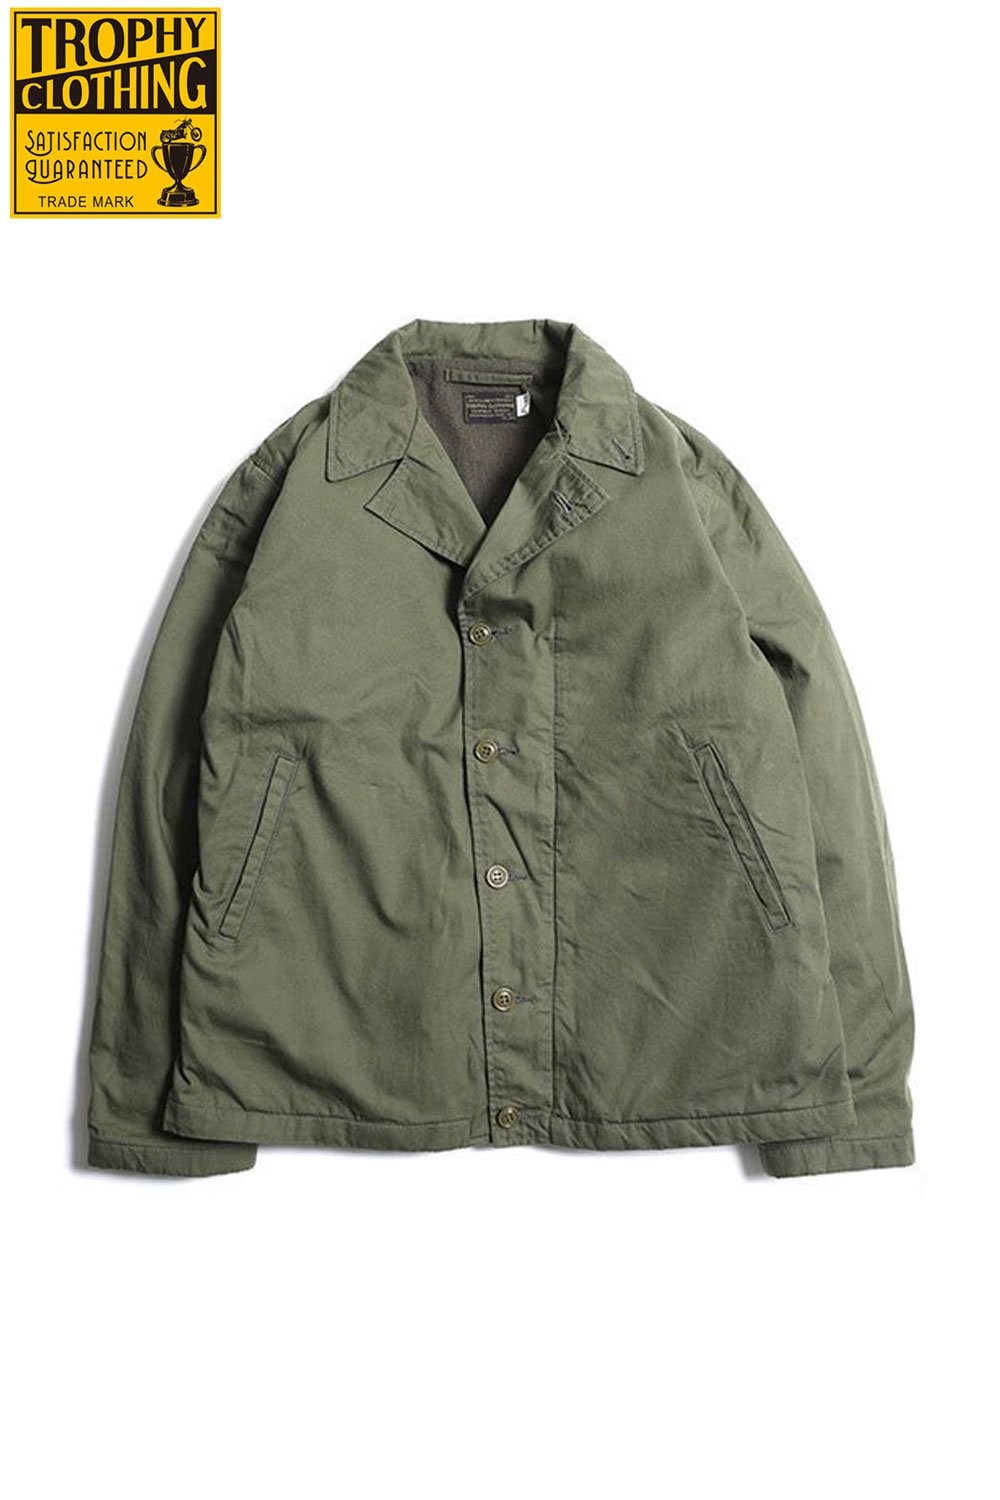 TROPHY CLOTHING(トロフィークロージング) フィールドジャケット N-4 TR.MFG TR22AW-505 通販正規取扱 |  ハーレムストア公式通販サイト